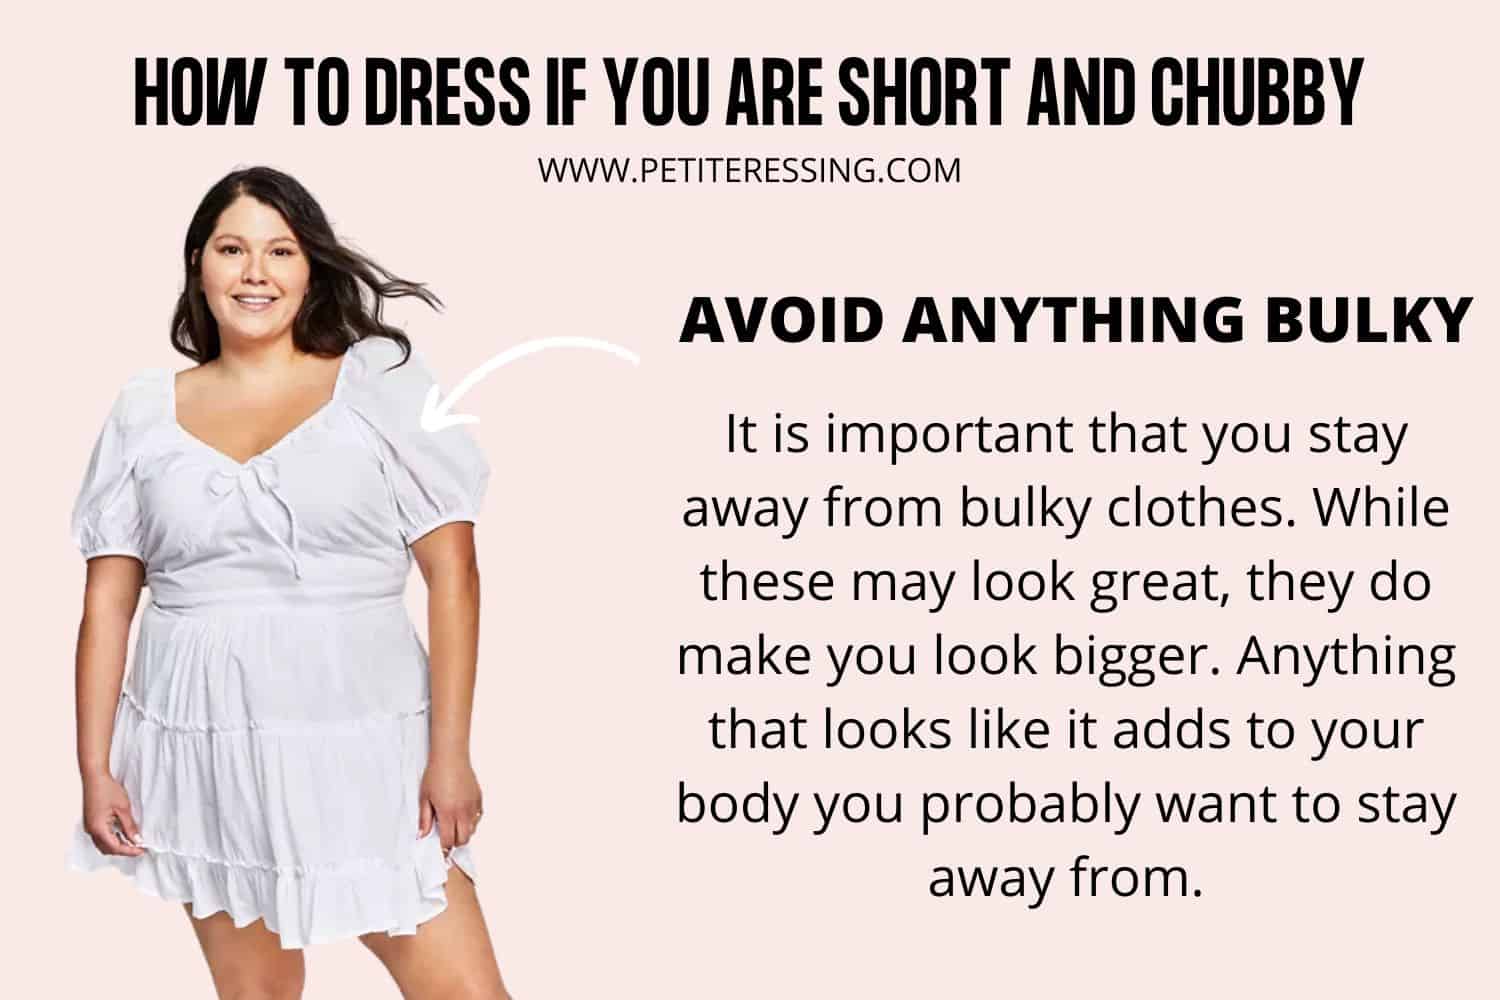 HOW-TO-DRESS-SHORT-AND-CHUBBY6